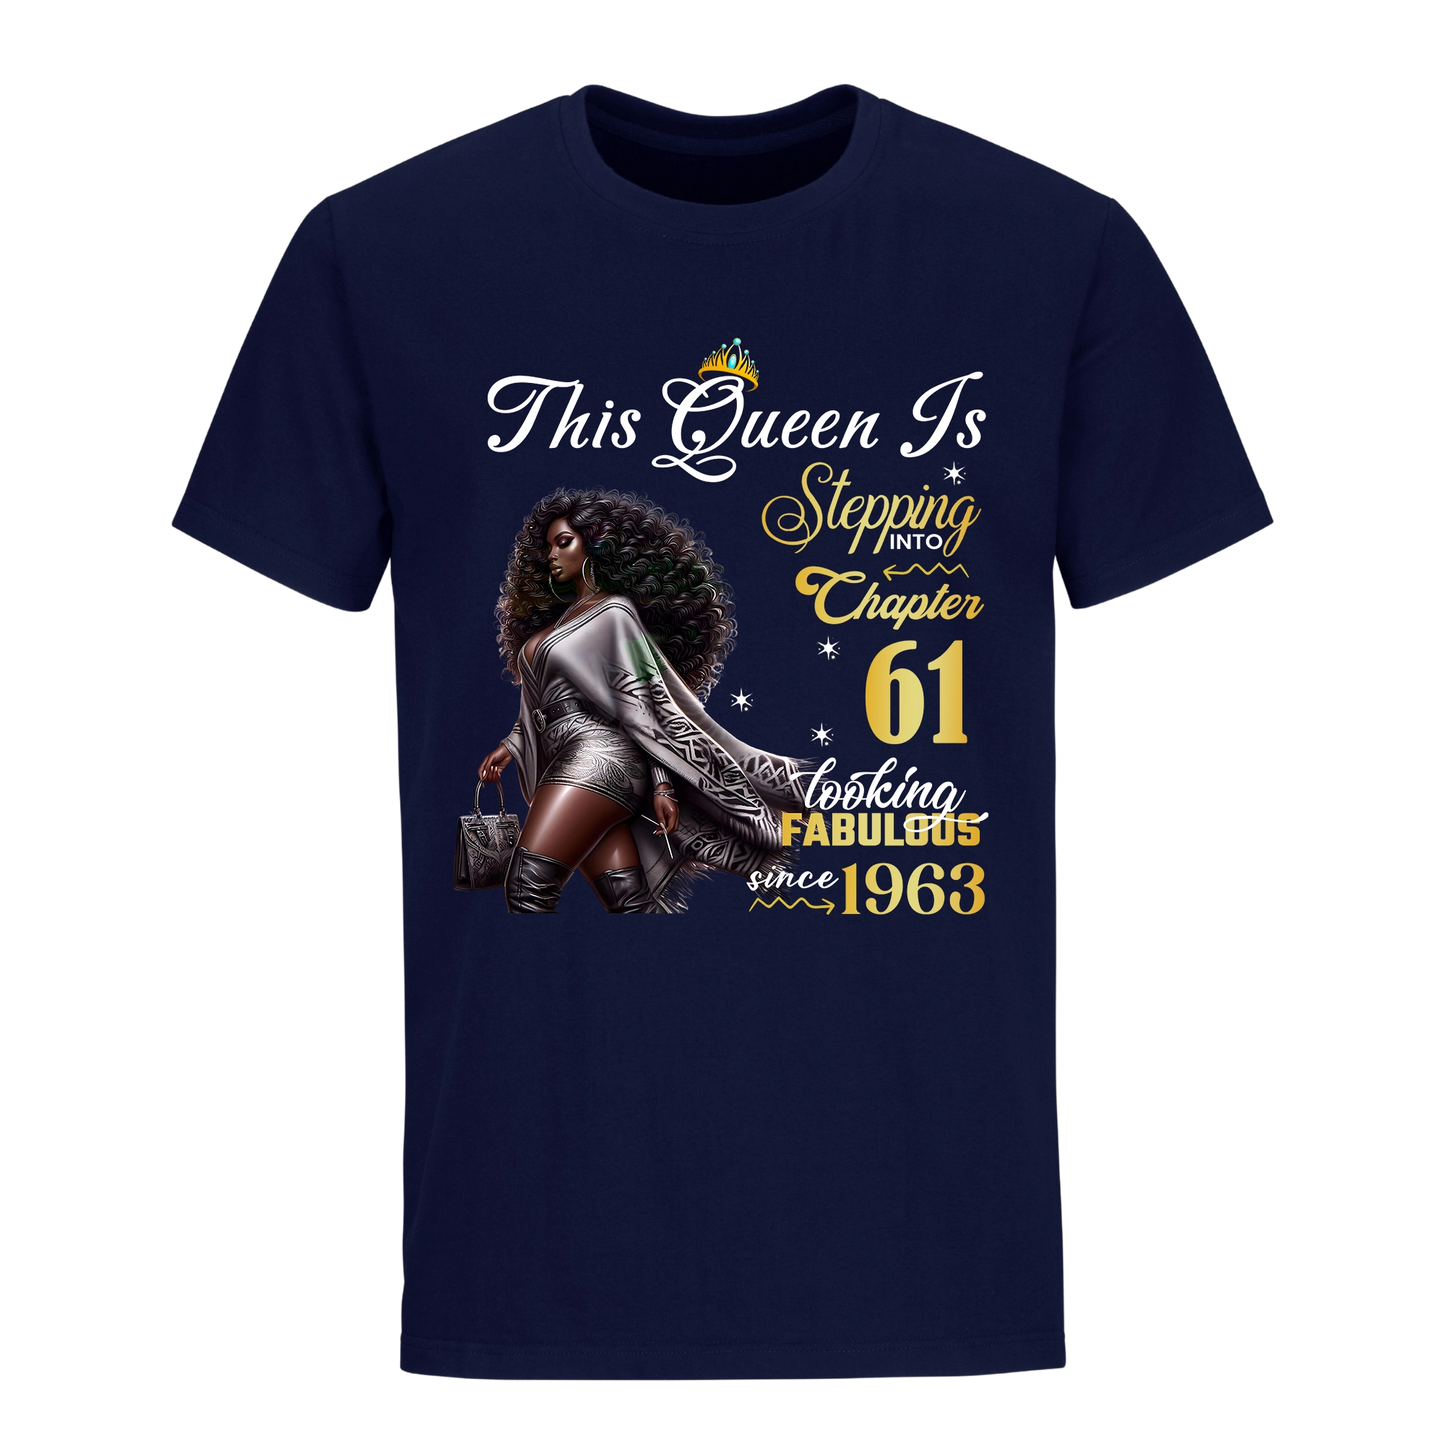 THIS QUEEN IS FABULOUS 61 UNISEX SHIRT